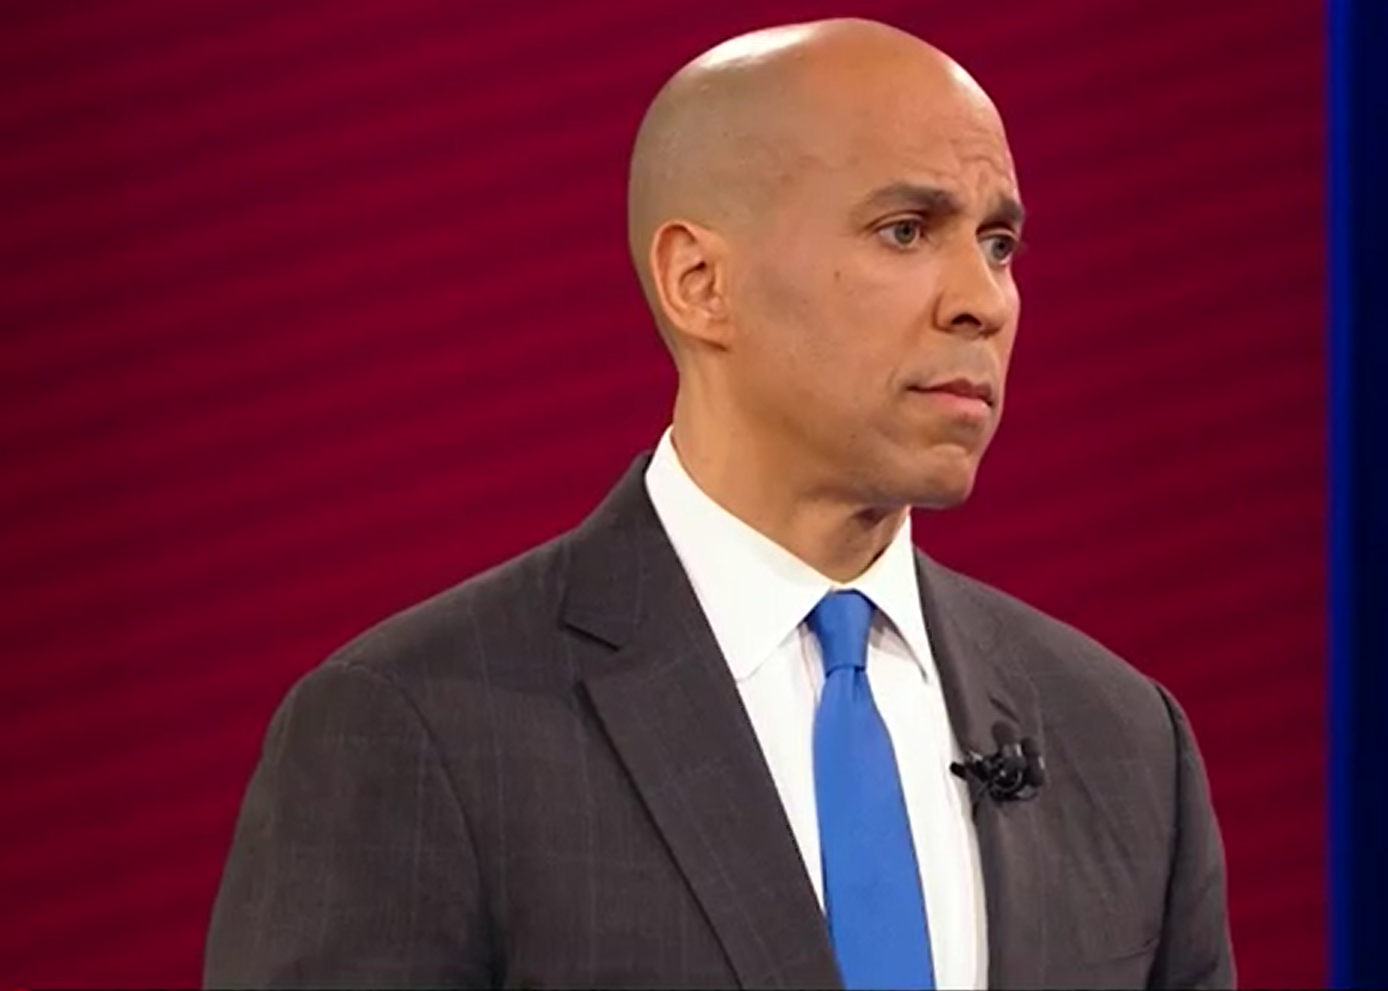 2020 presidential election candidate Cory Booker is invited to participate in the Democratic National Committee's (DNC) first debate.